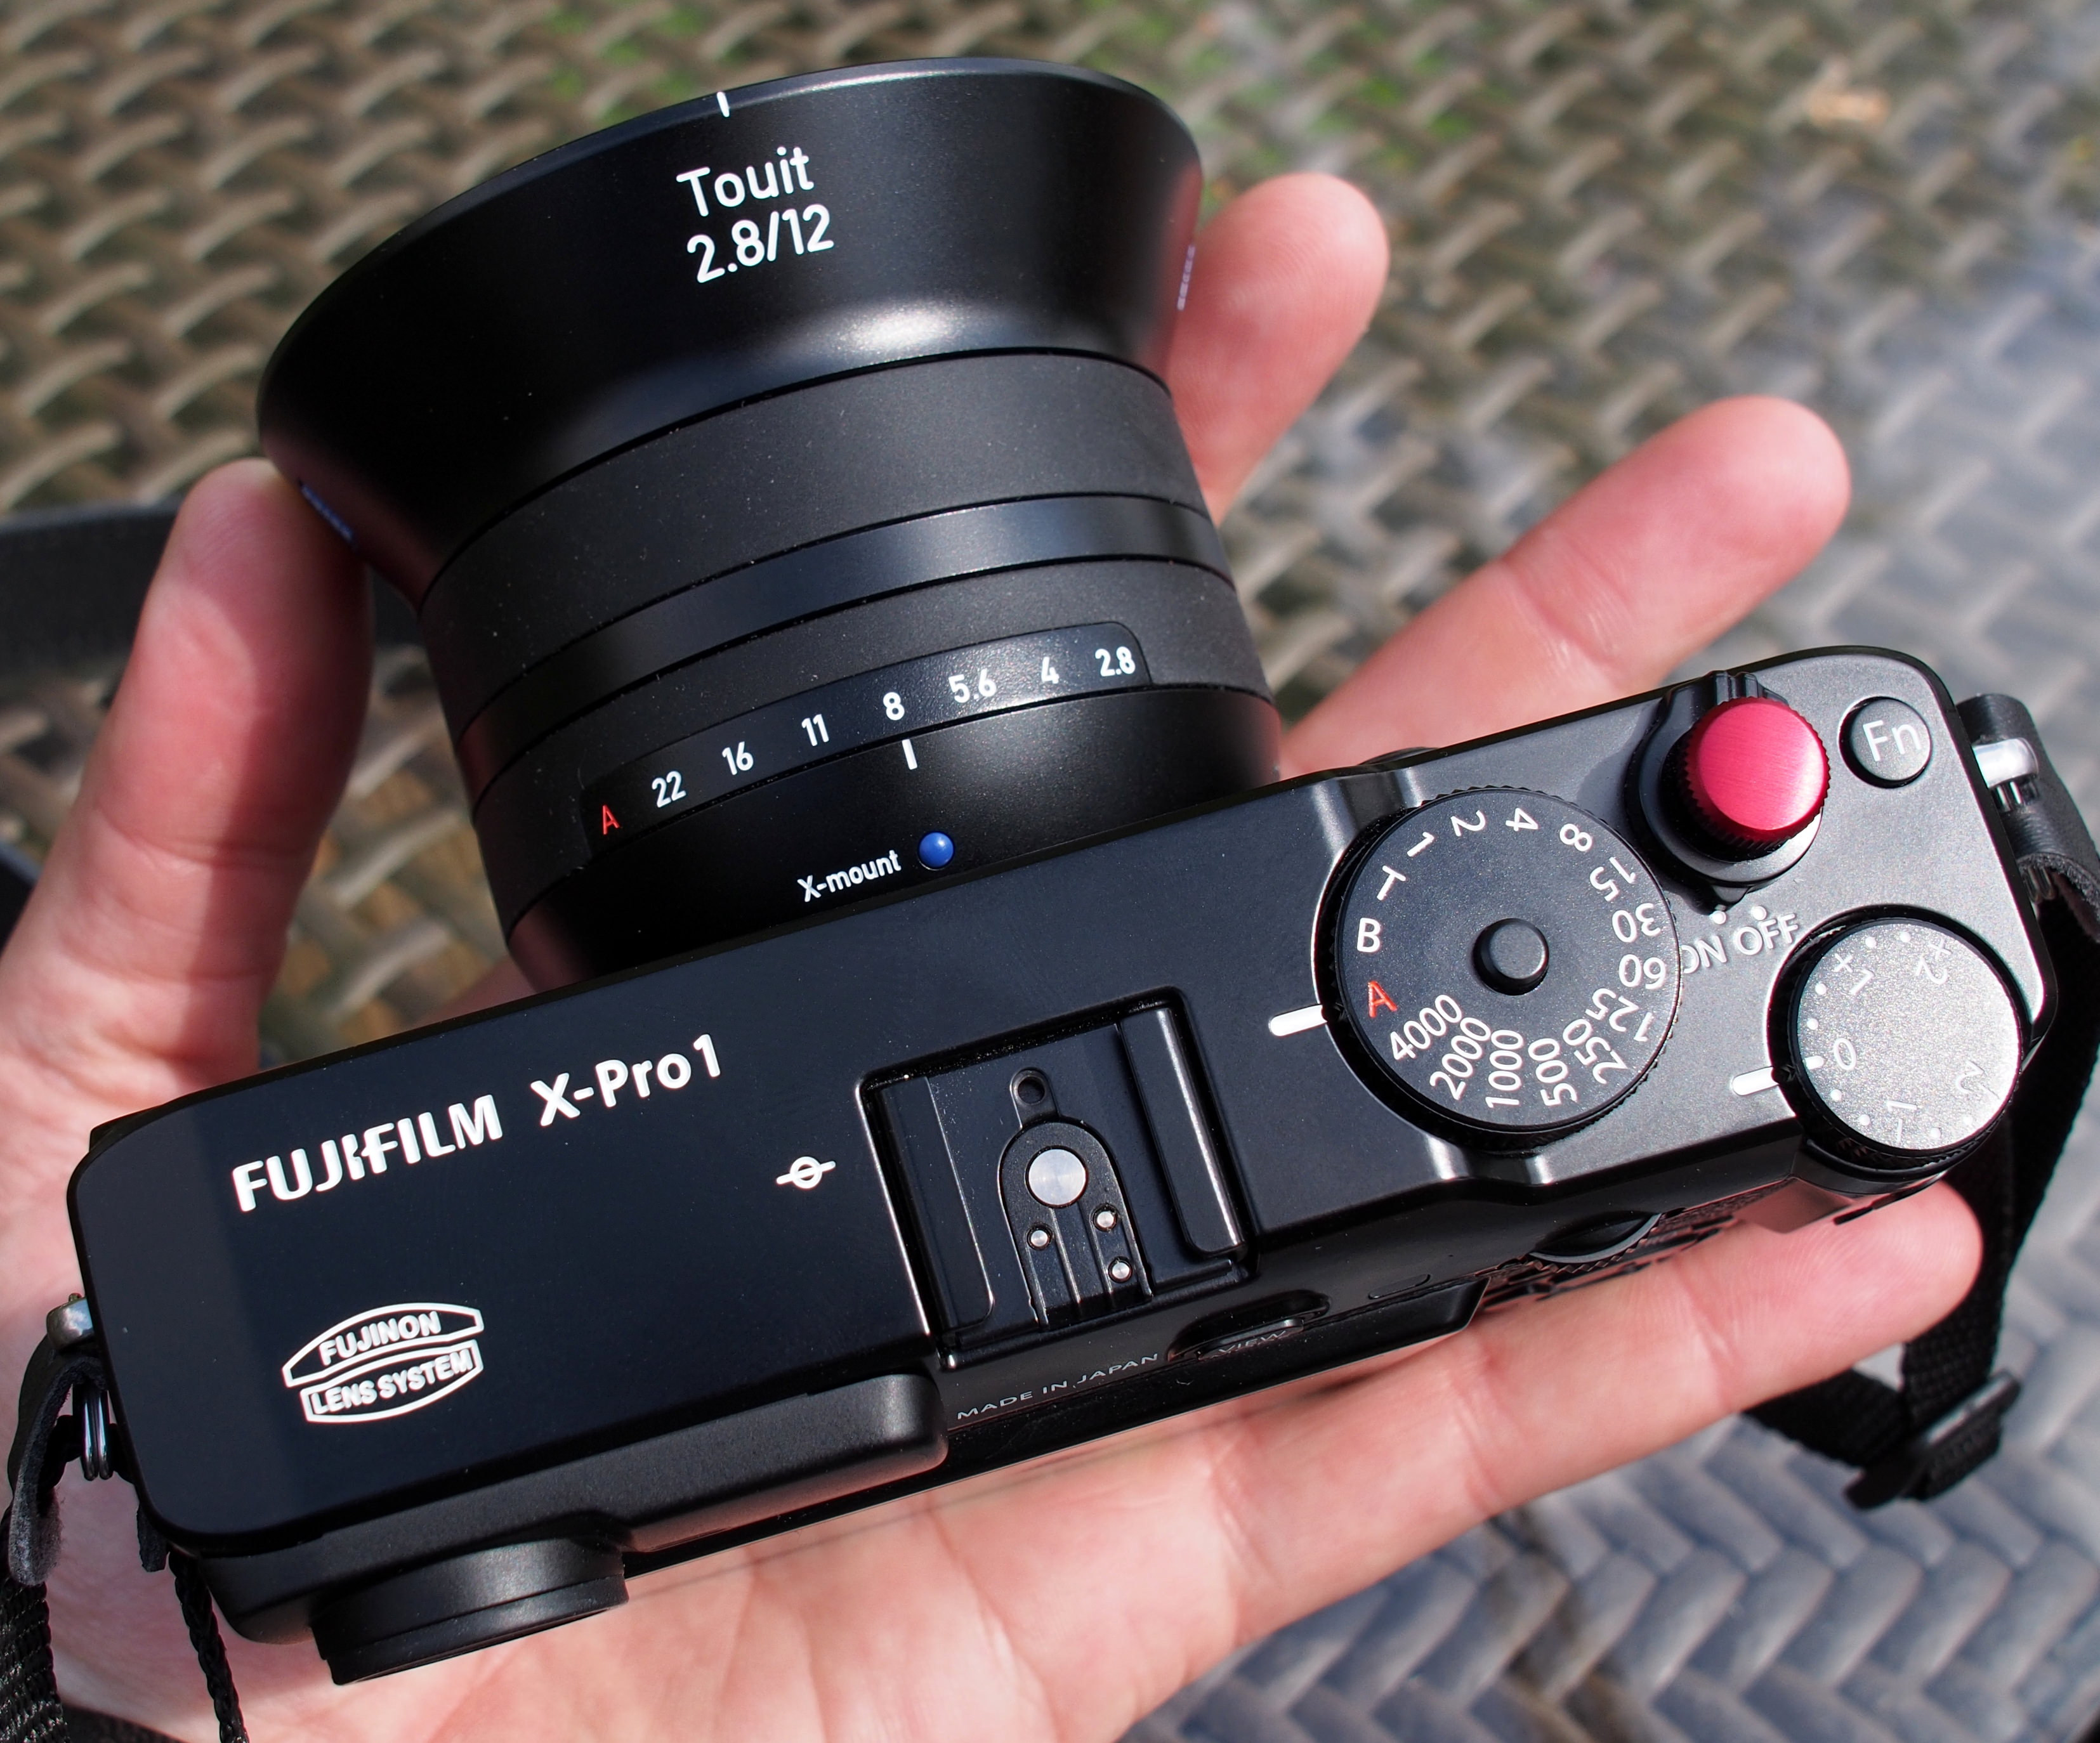 zeiss touit 12mm f 2.8 lens sony e mount review